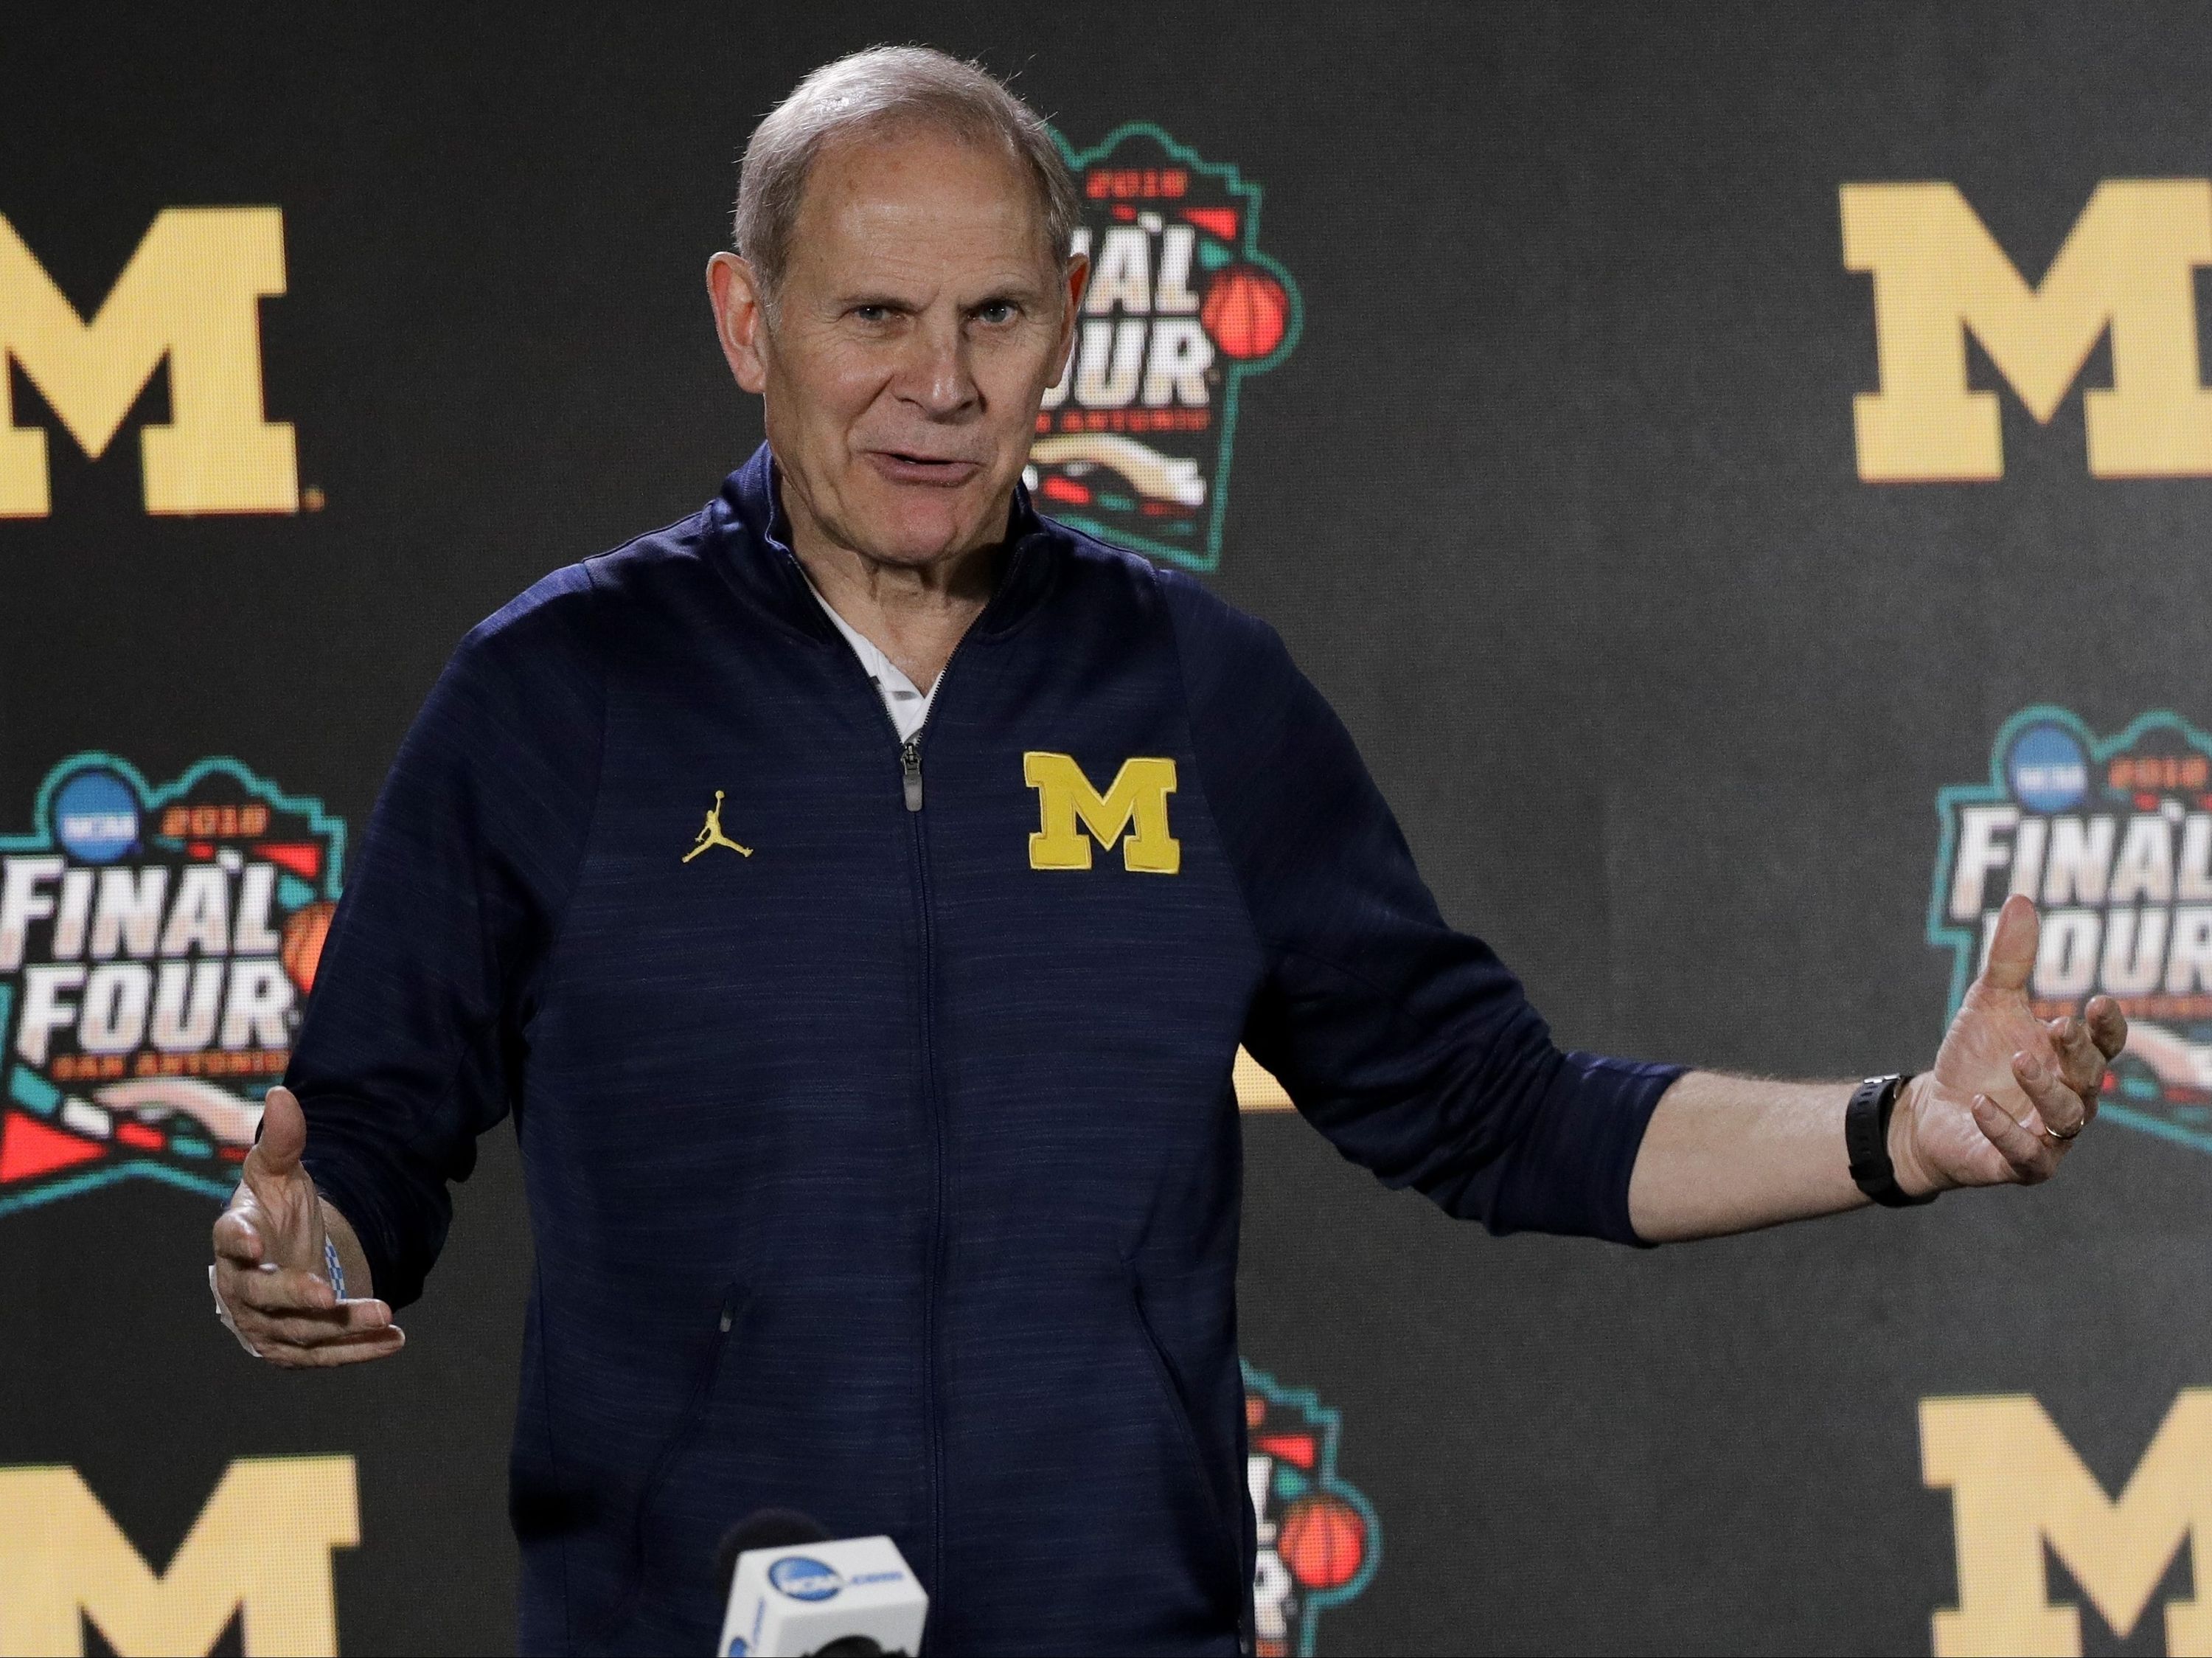 U of M coach Beilein headed to NBA’s Cleveland Cavaliers | National Post